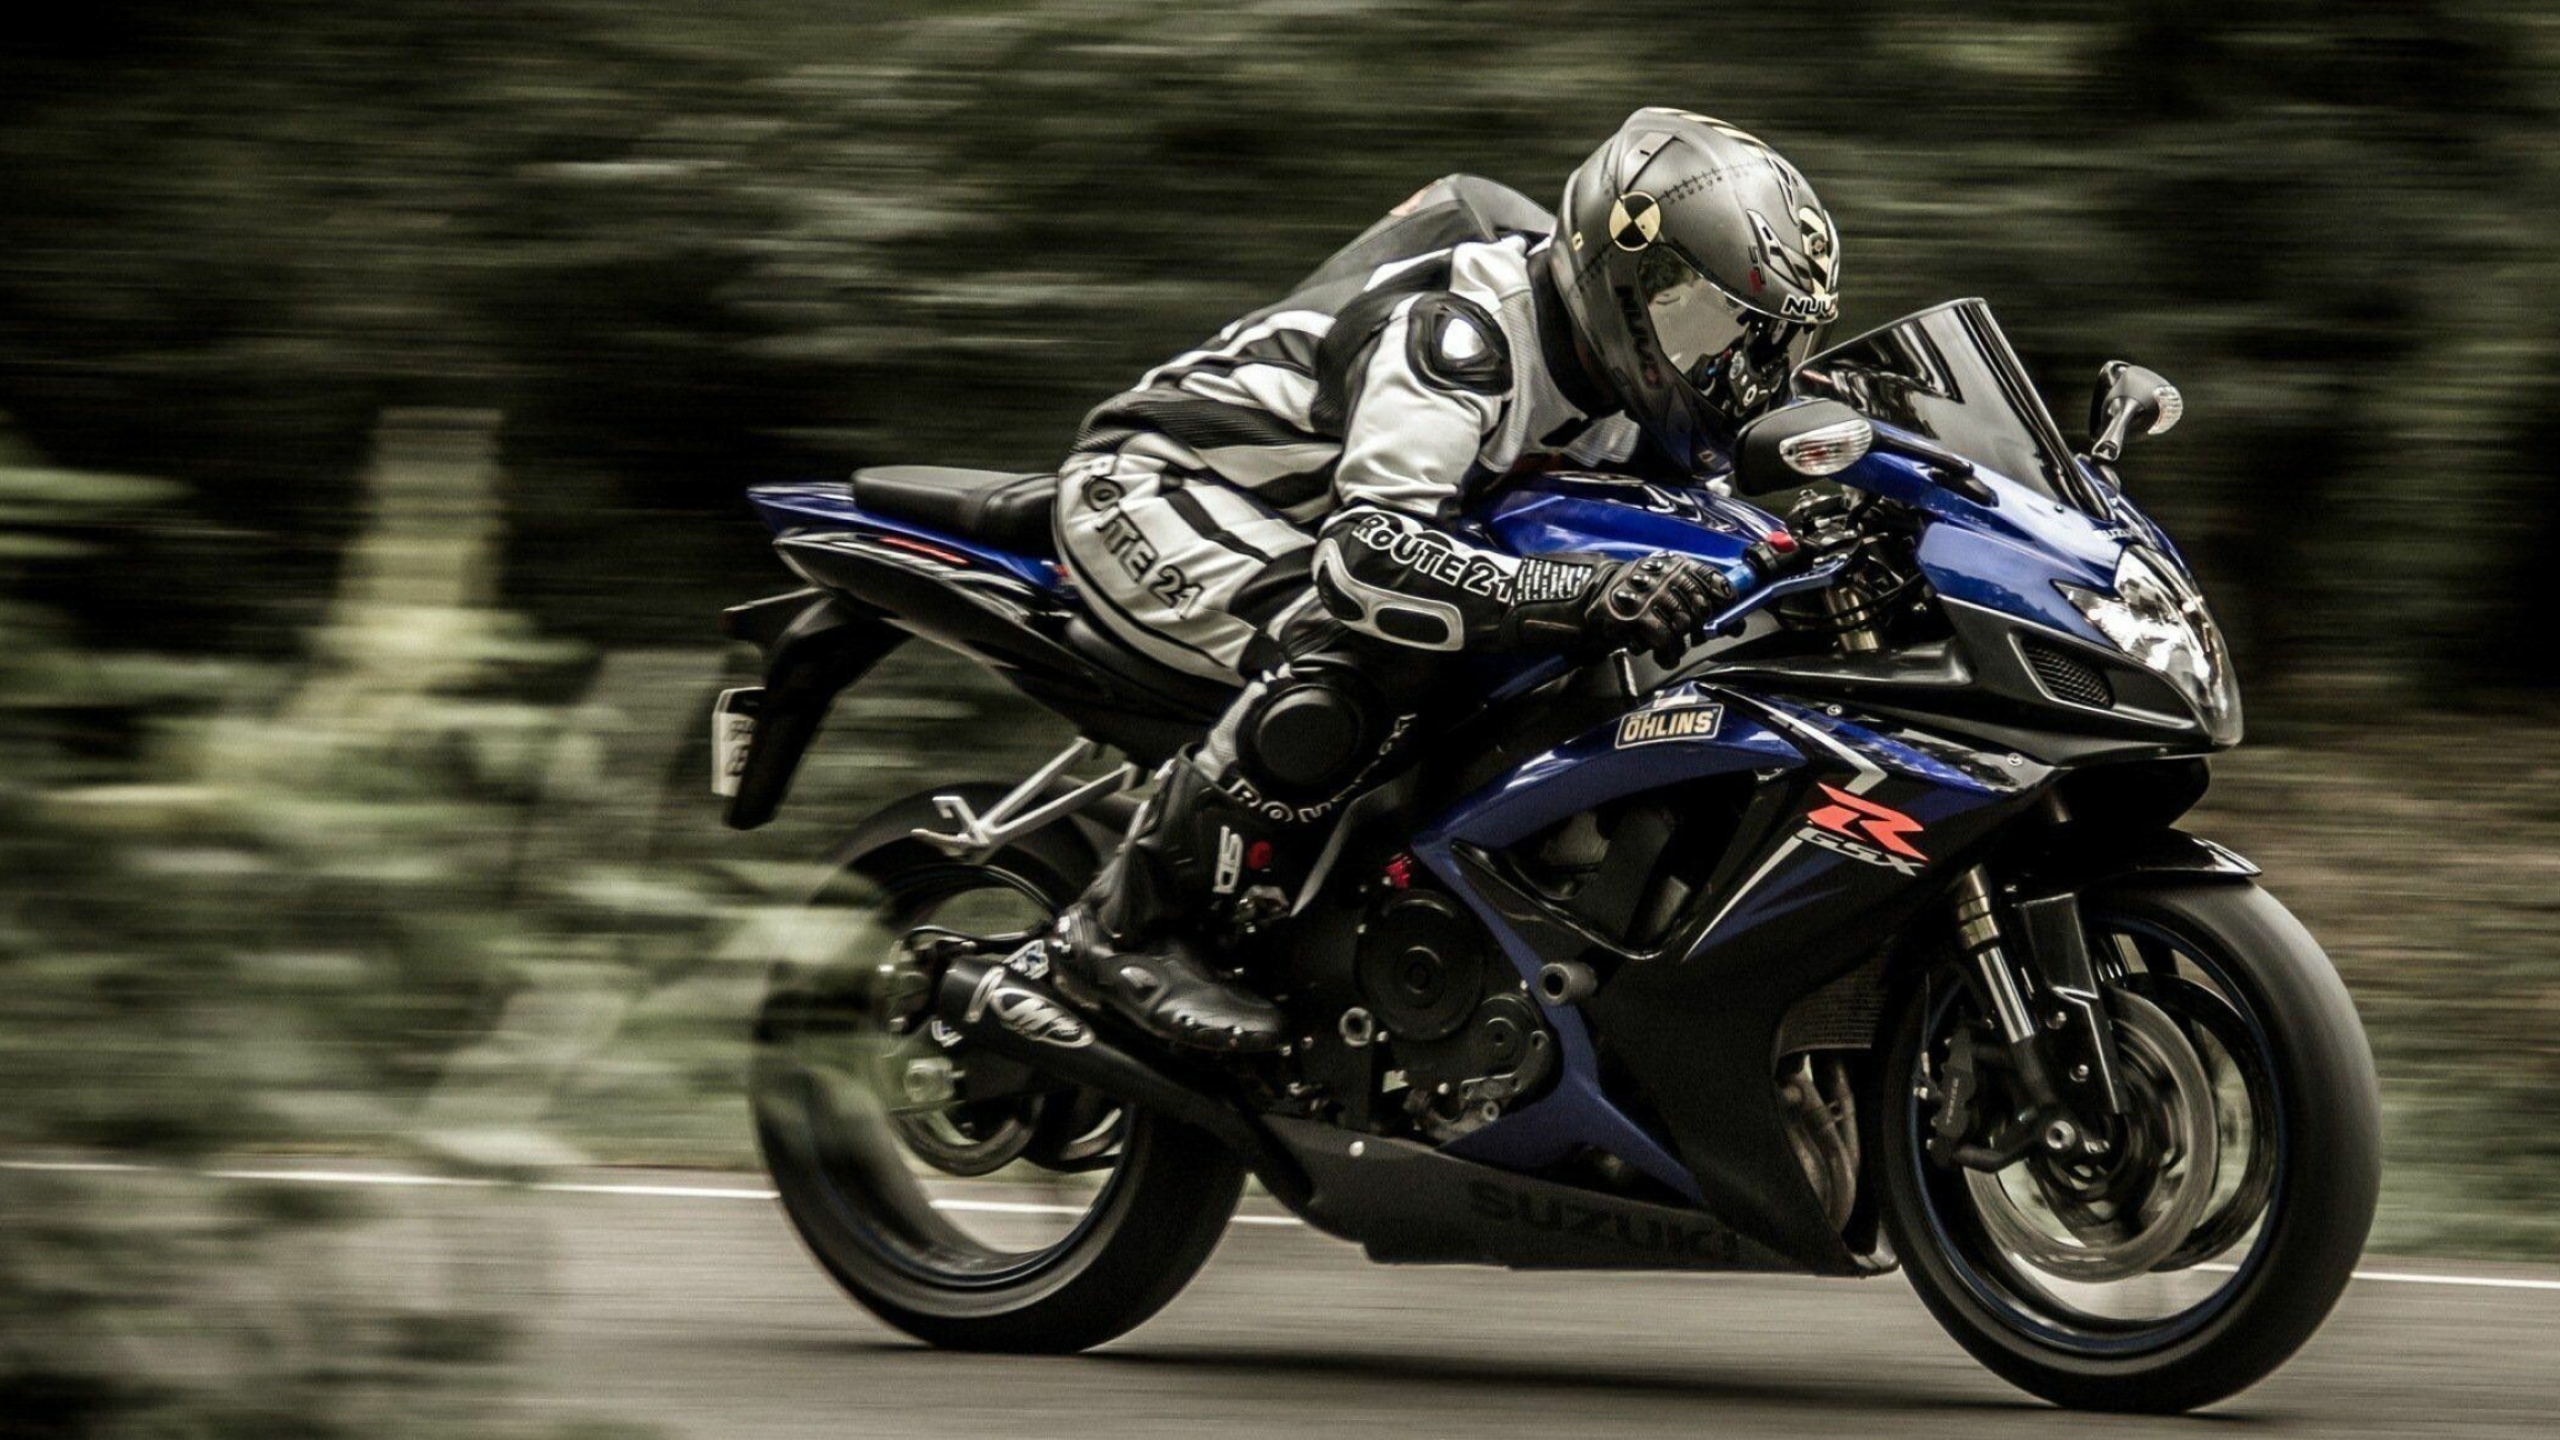 GSX-R: Current Gixxer models are: 750, 600, and 1000, Motorbike. 2560x1440 HD Background.